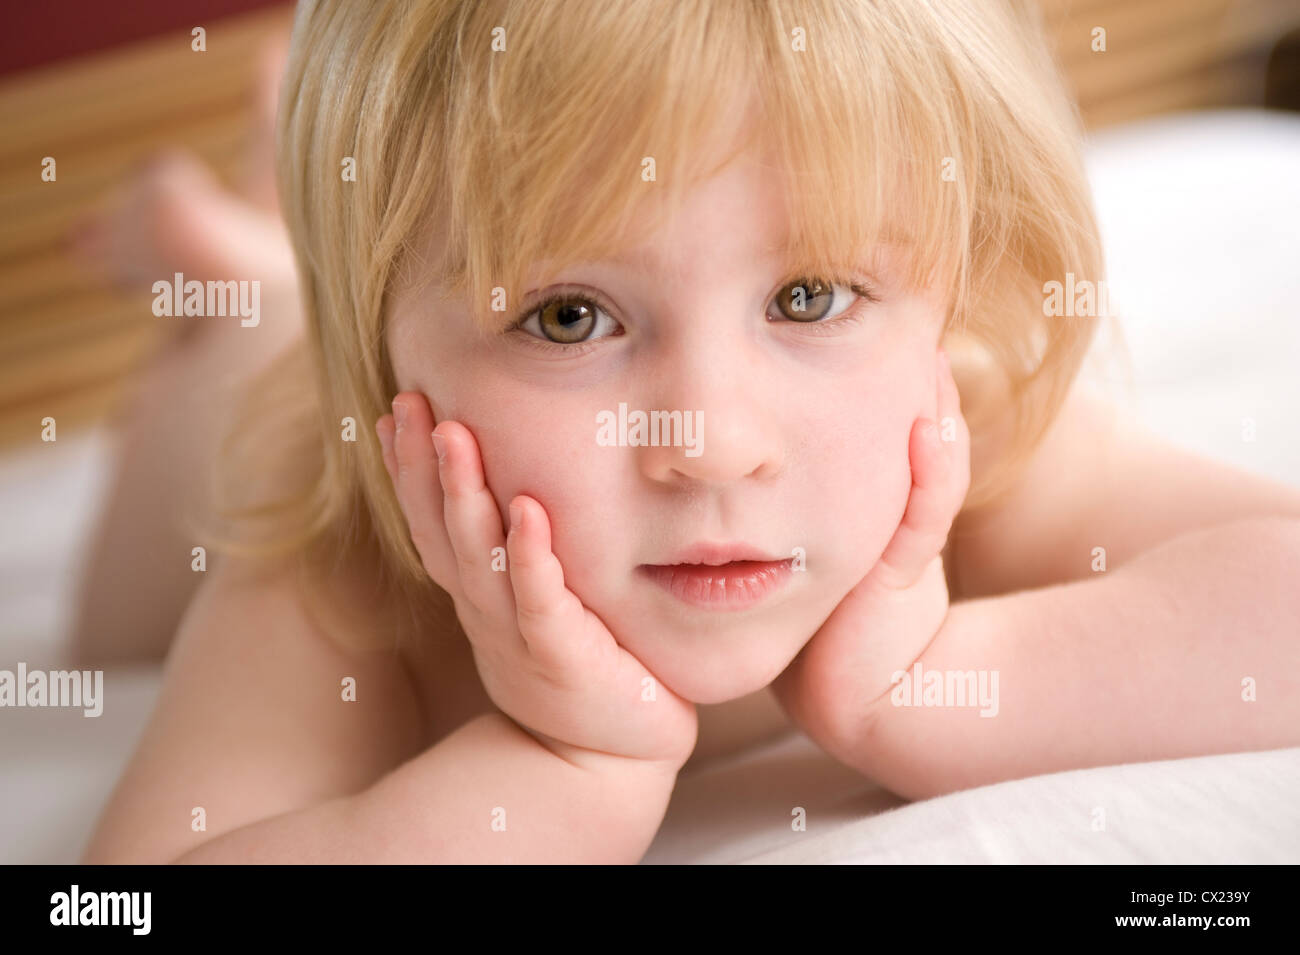 A pretty young Caucasian girl looking into camera Stock Photo